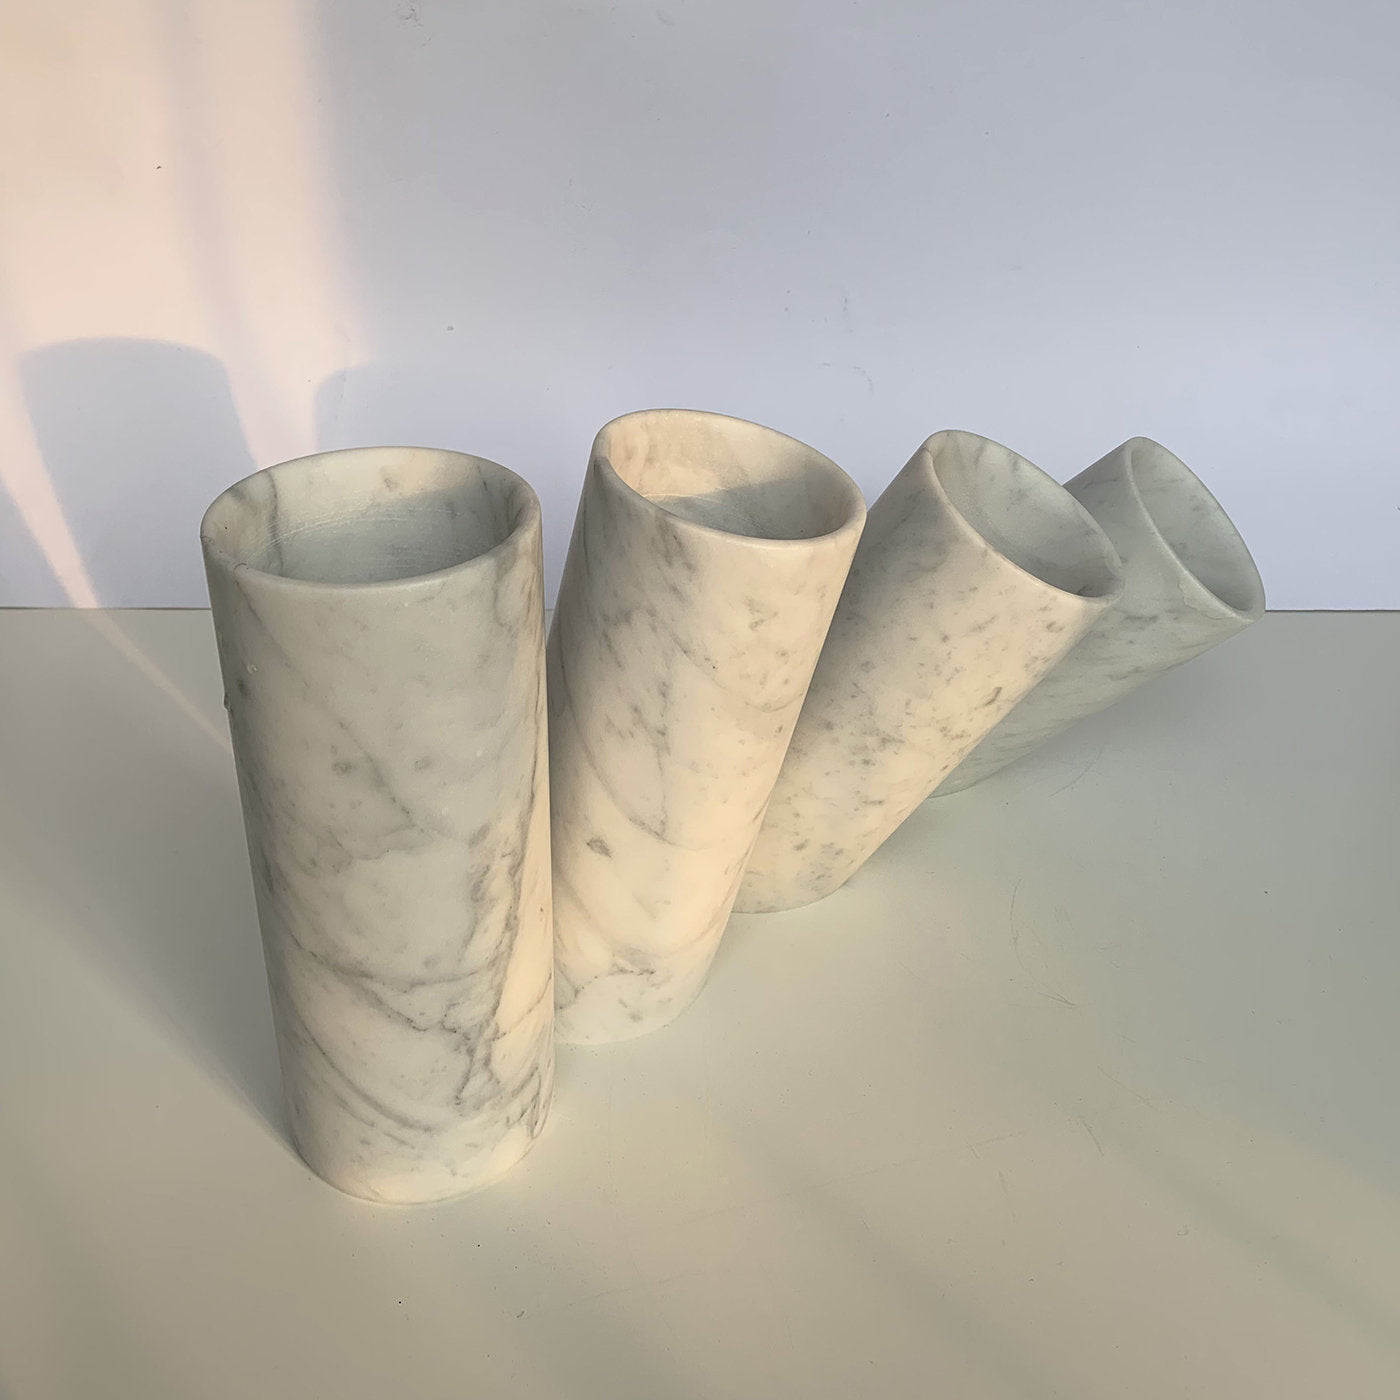 In Equilibrio Set of 4 Vases by Moreno Ratti - Alternative view 3